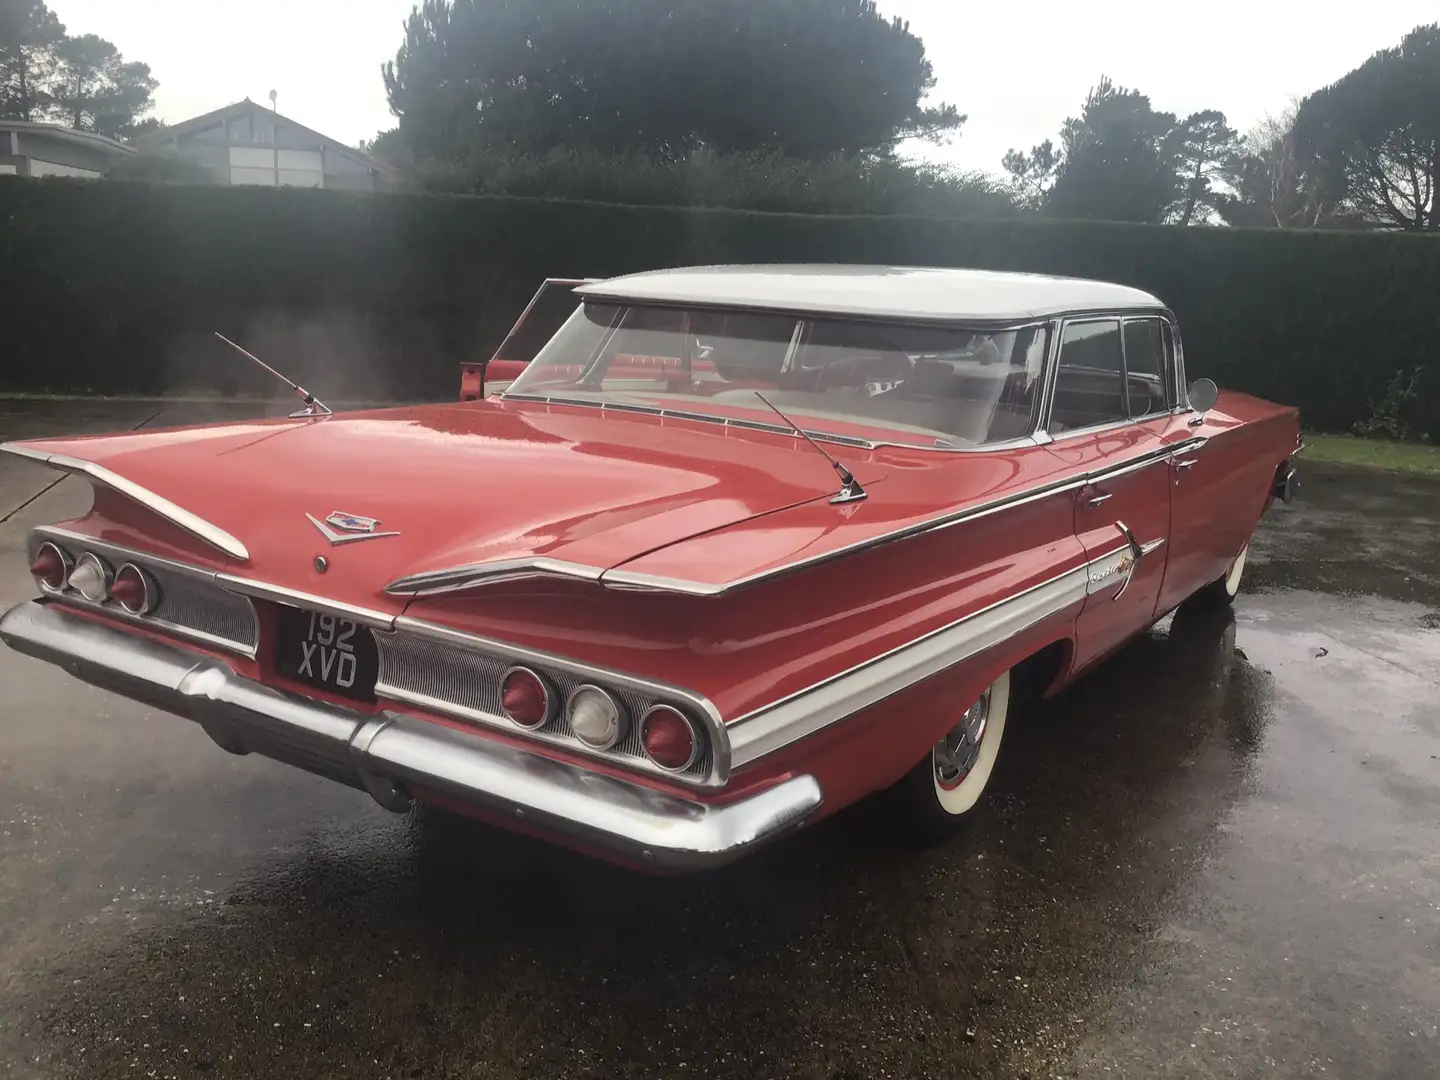 Chevrolet Impala automatic, power steering, working aircon, superb Red - 1